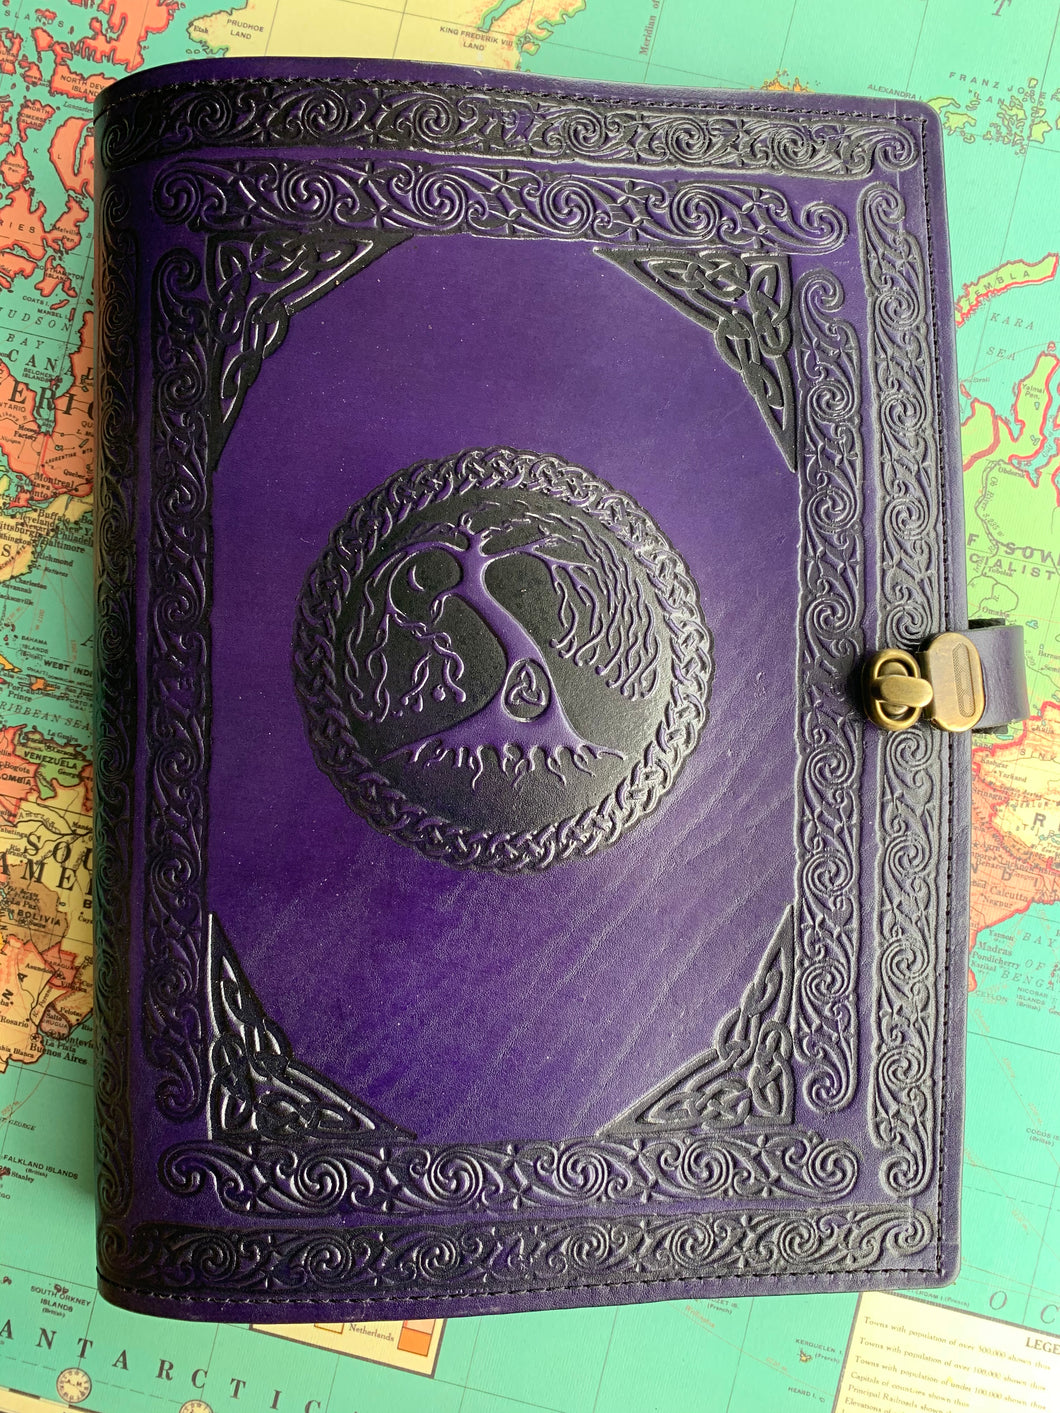 A4 Leather Journal Cover - Celtic Tree of Life - Purple - with Clasp